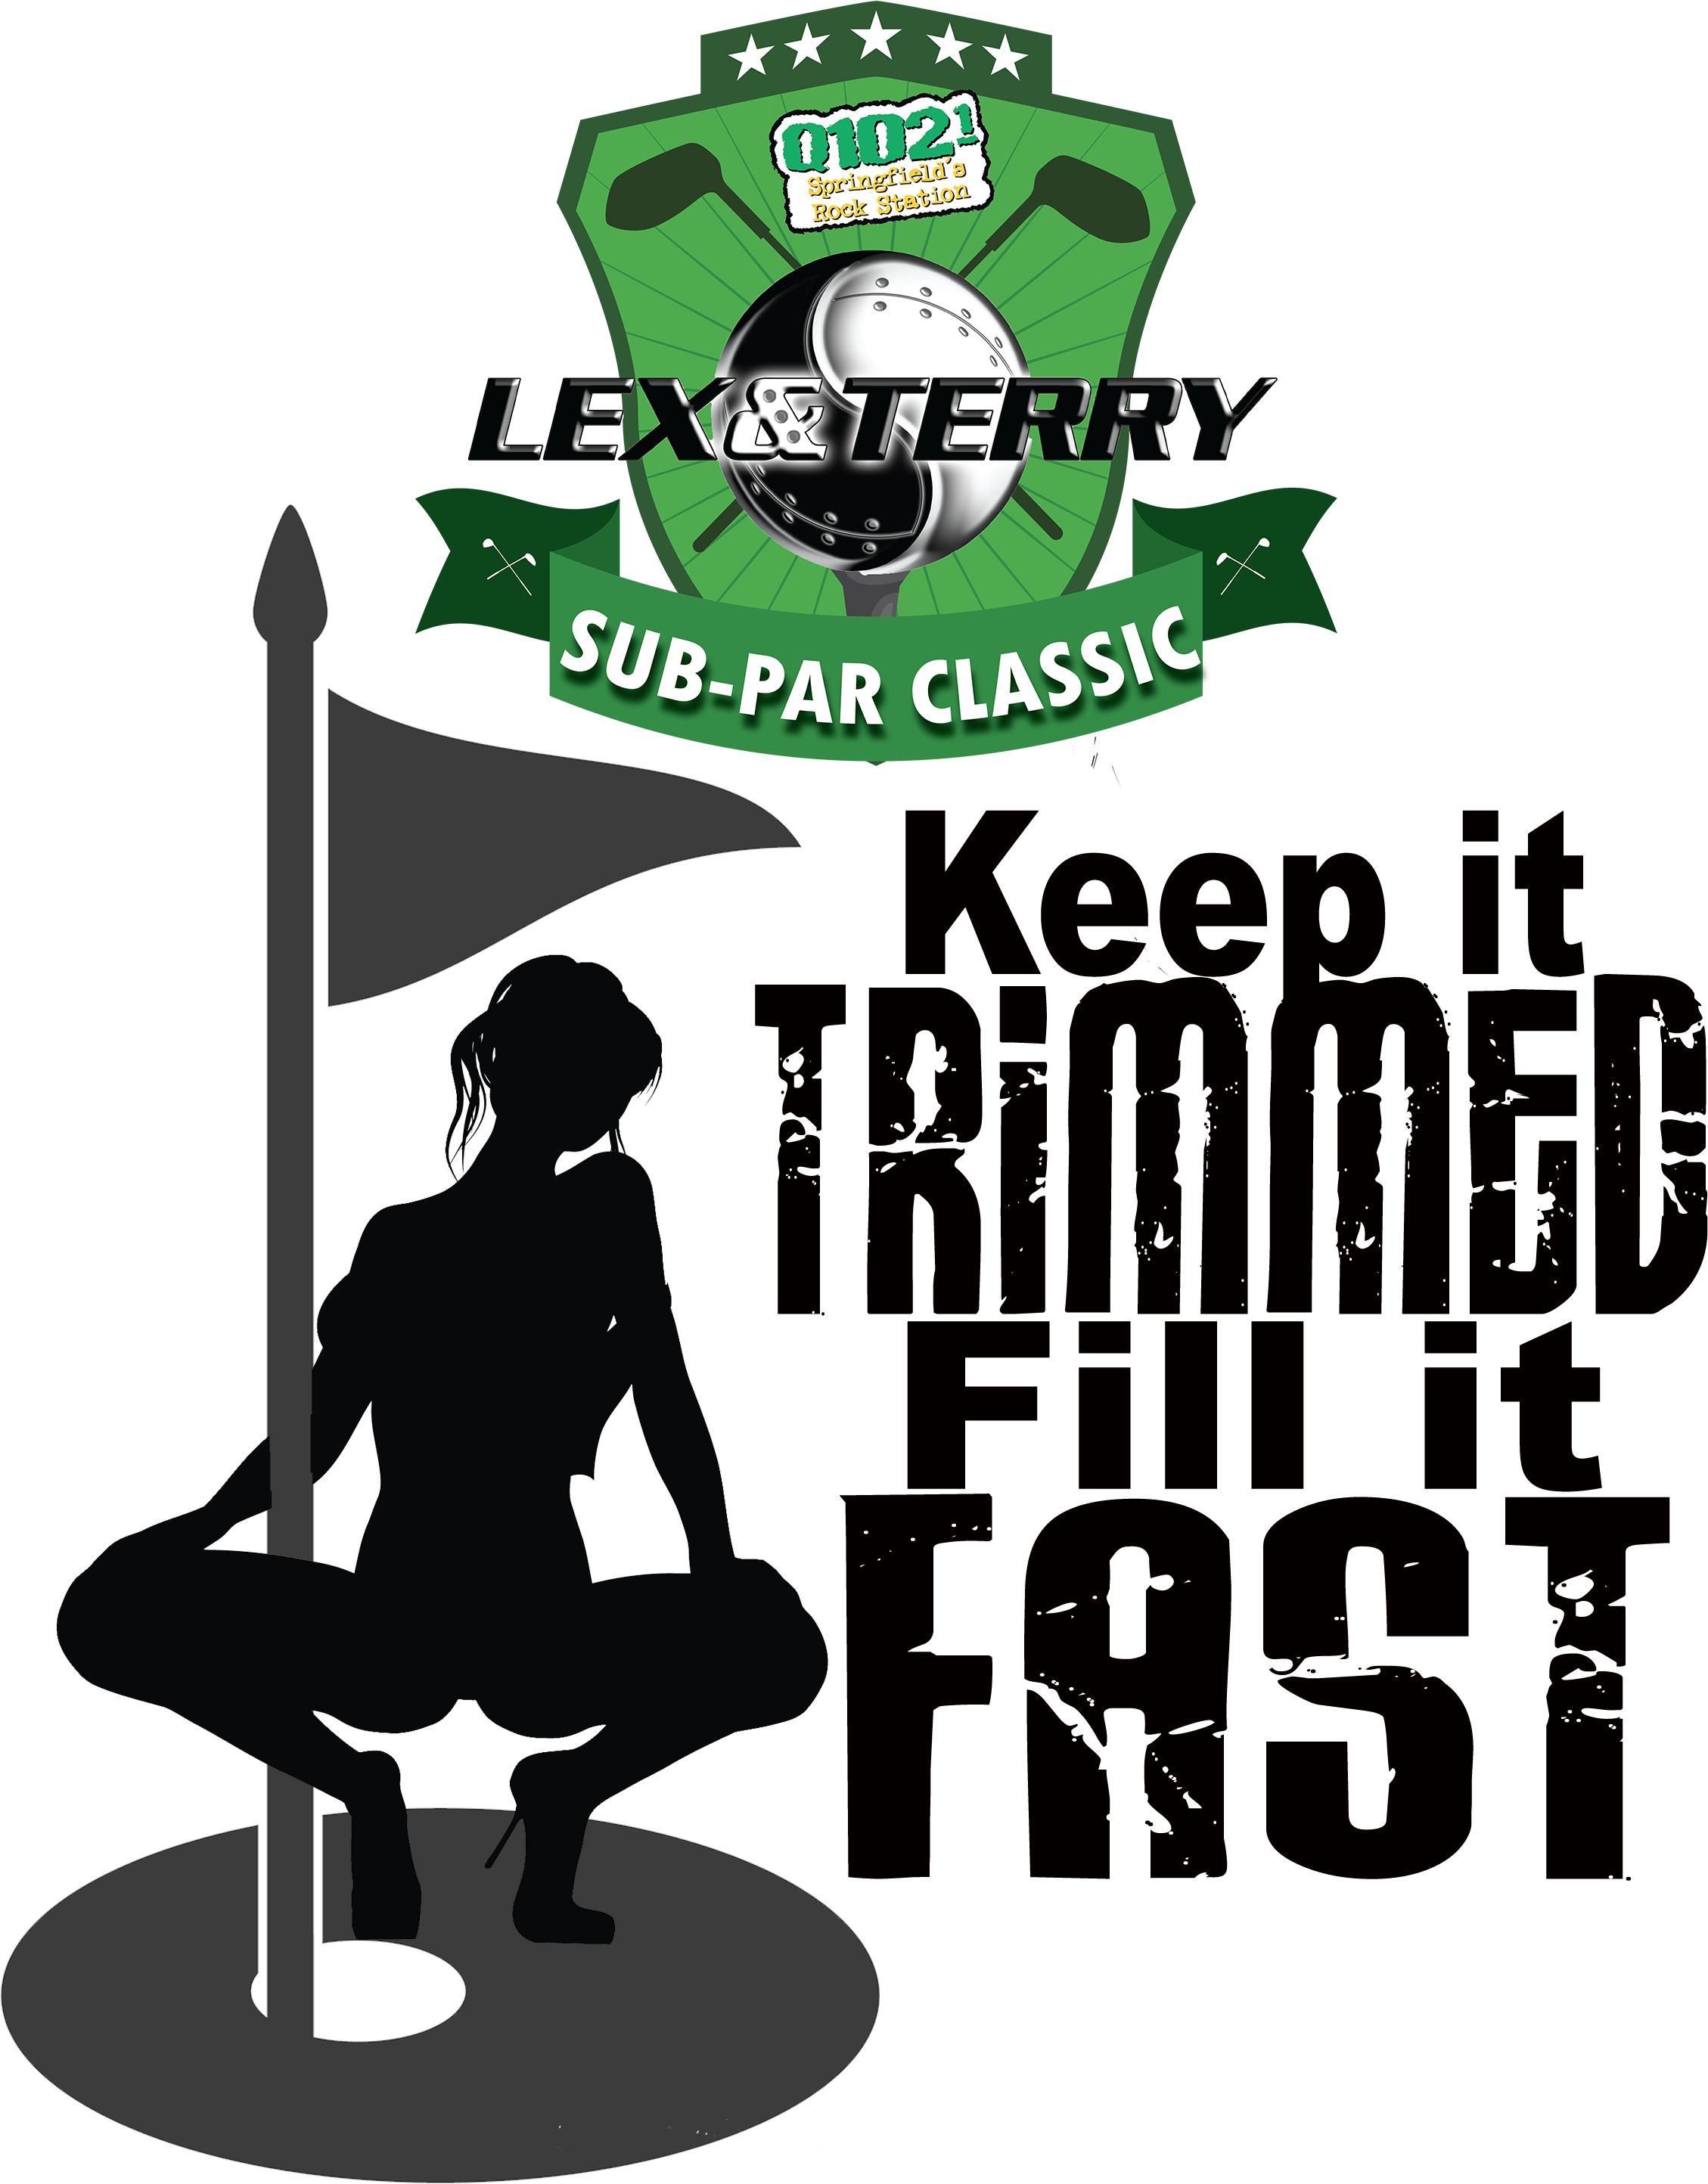 The Scores From The Lex And Terry Sub Par Classic - Pantsonthegroundwhite [converted] Oval Ornament (2400x3000), Png Download